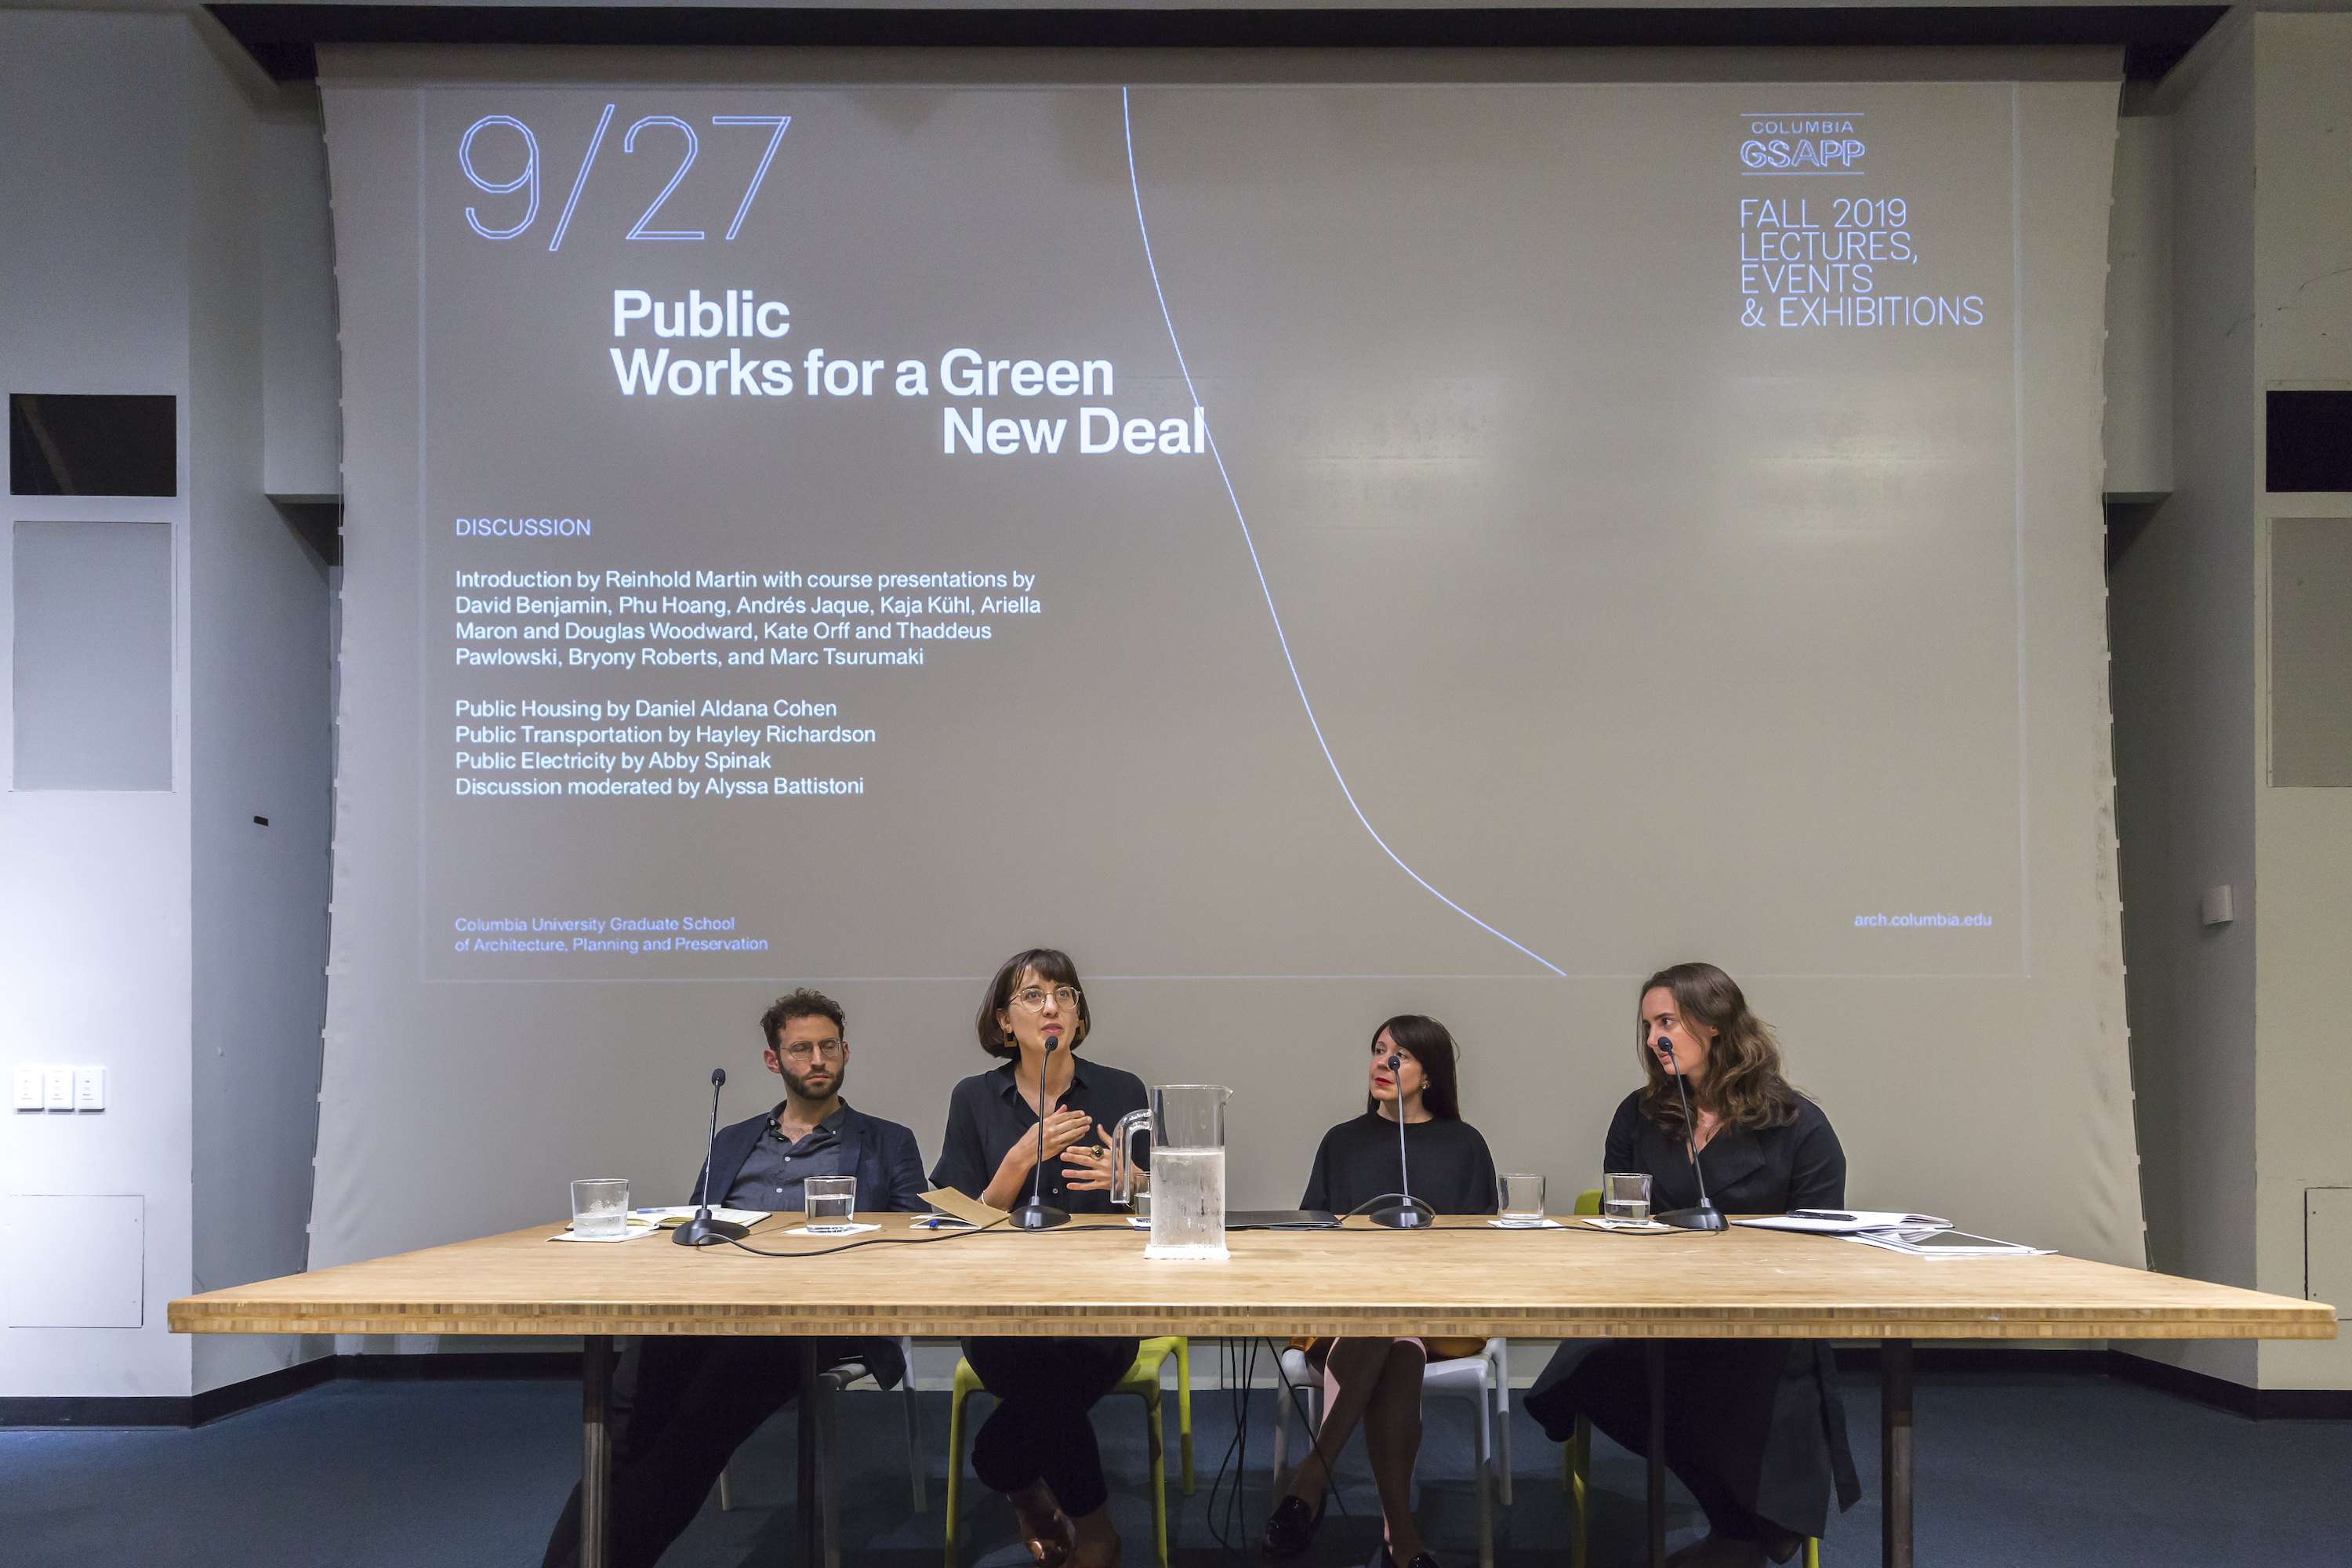 Image of panel discussion at "Public Works for a Green New Deal." Discussion moderated by Alyssa Battistoni, seen next to Daniel Aldana Cohen.